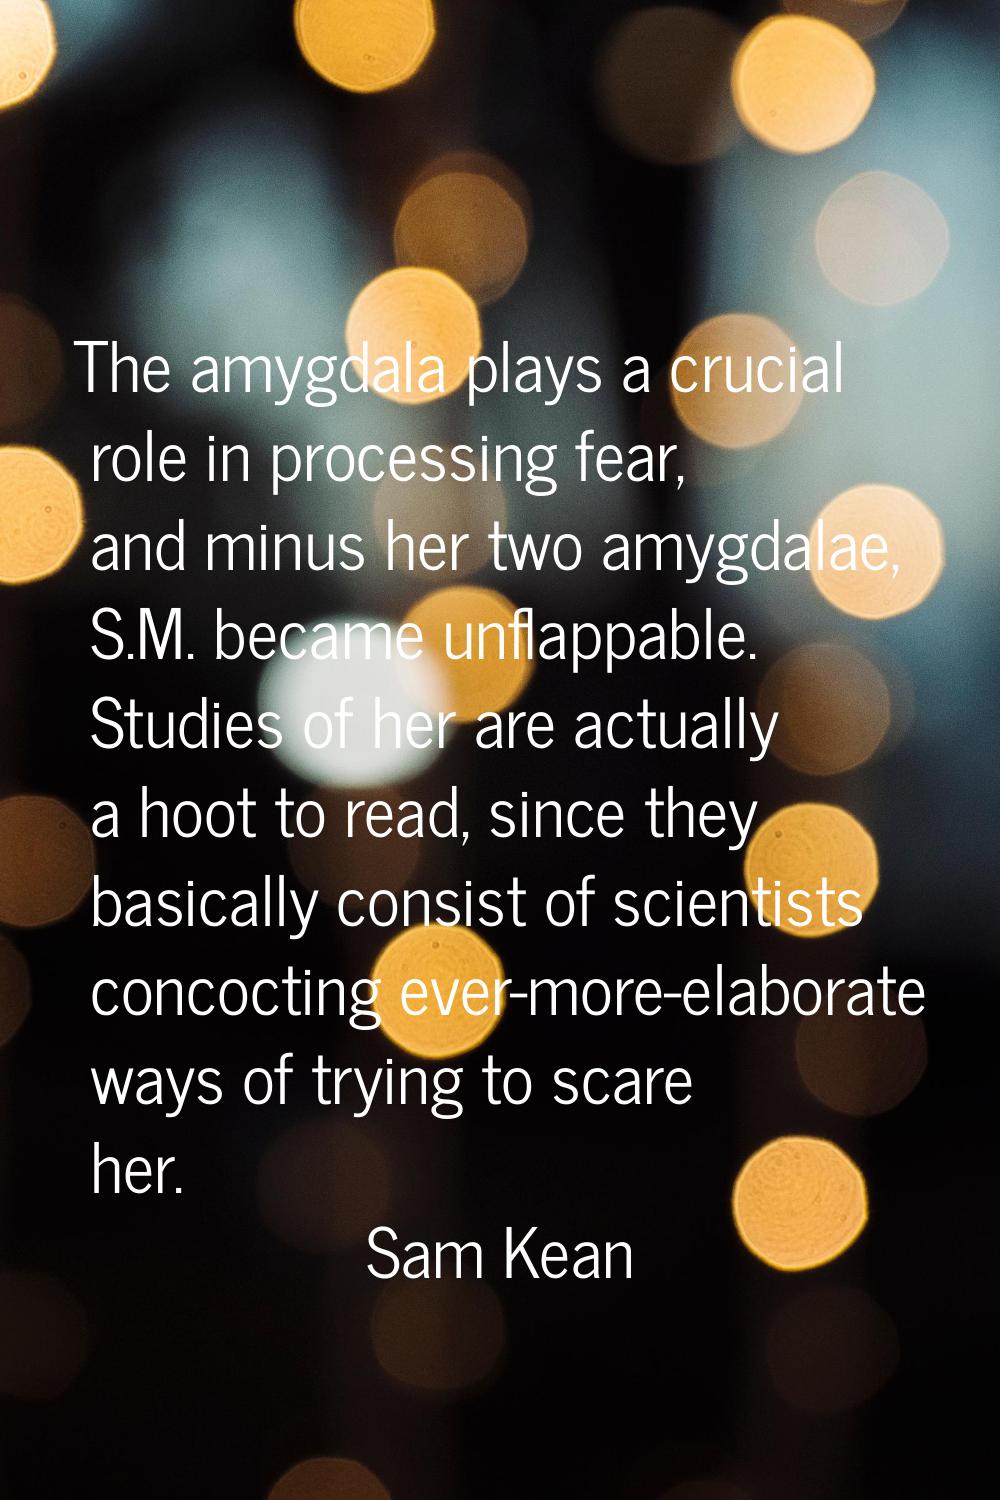 The amygdala plays a crucial role in processing fear, and minus her two amygdalae, S.M. became unfl